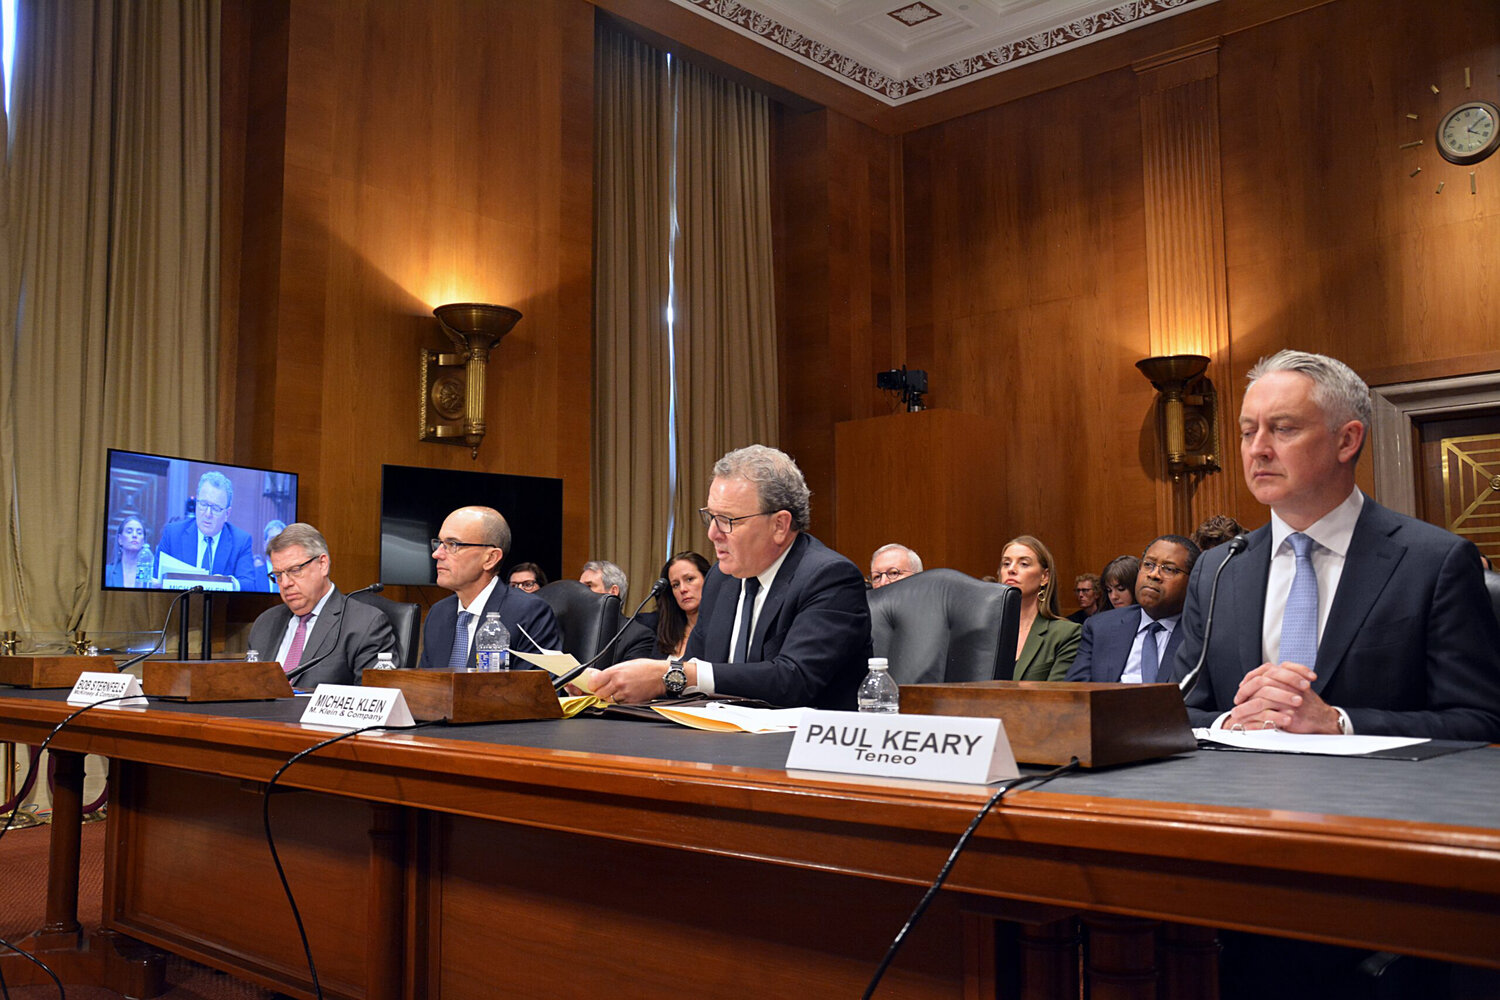 Consulting executives testified in Congress on Tuesday regarding their firms’ relationships with Saudi Arabia. From left are Rich Lesser of Boston Consulting Group; Bob Sternfels of McKinsey & Co.; Michael Klein of M. Klein & Co.; and Paul Keary of Teneo.